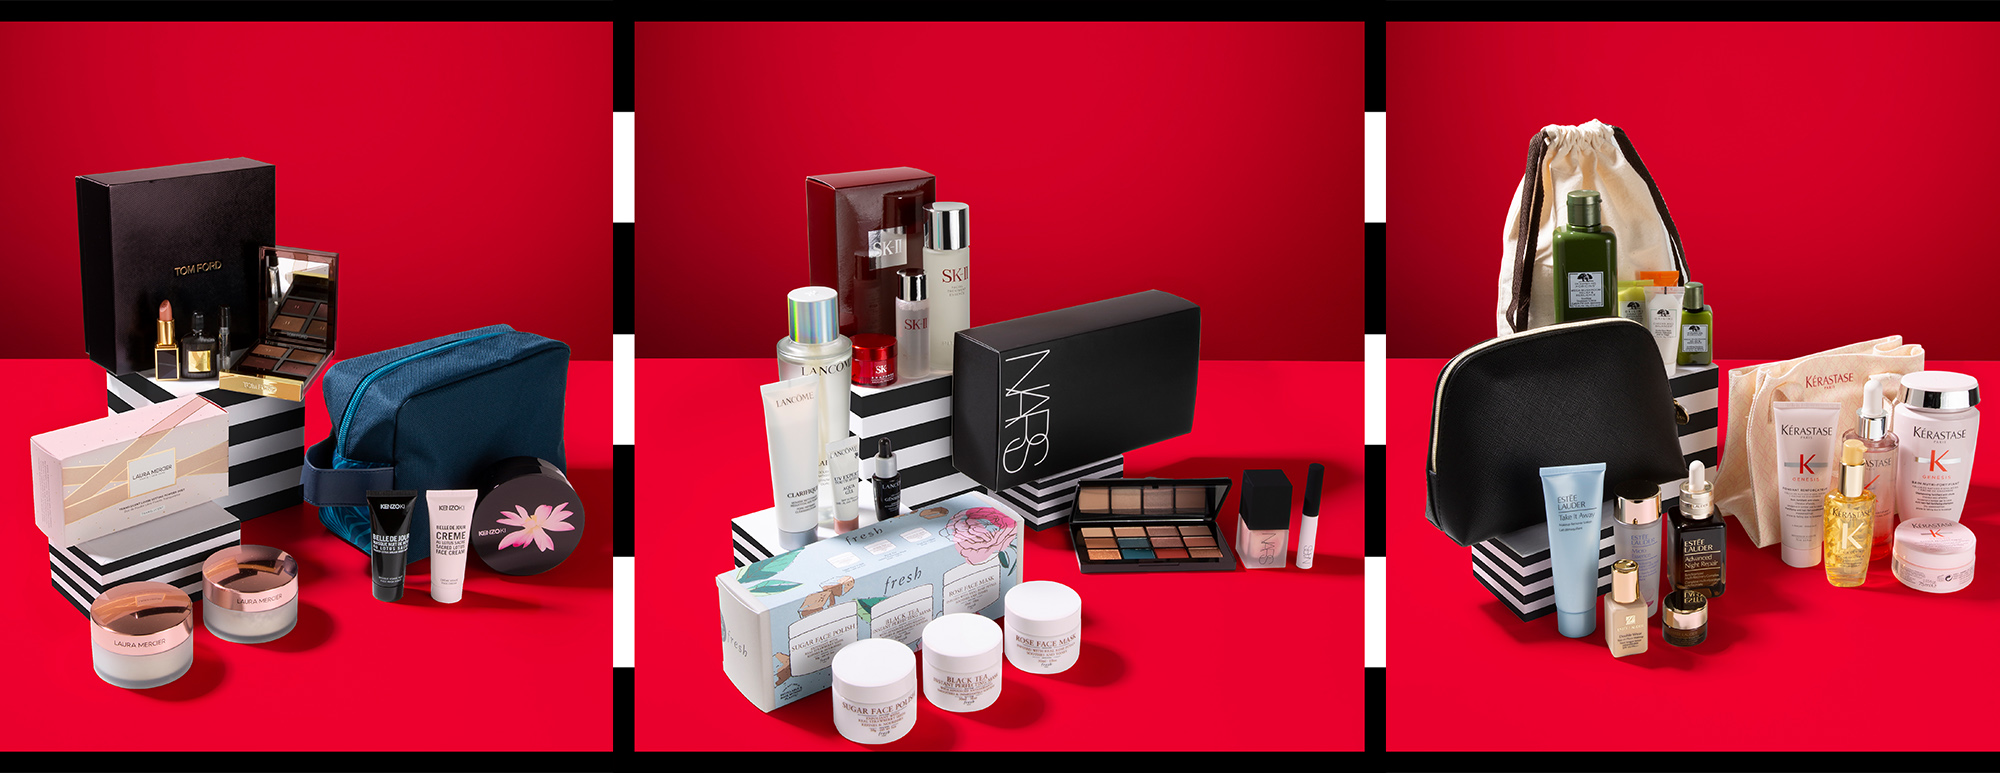 The Sephora sale is back from 31 Mar to 4 Apr with discounts of up to 25